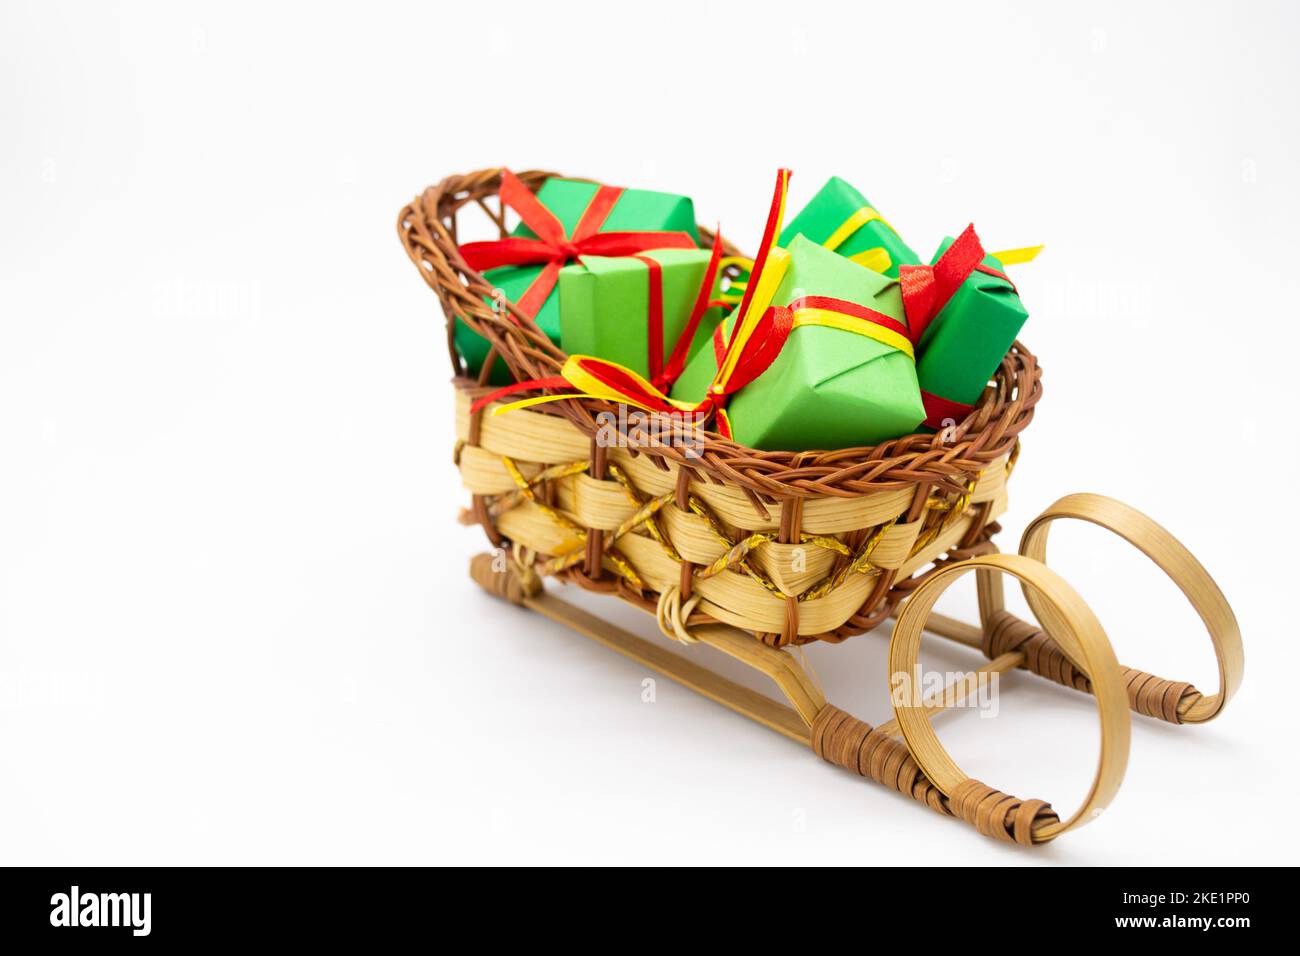 Old-fashioned wicker Santa sleigh with Christmas gifts wrapped in green paper with red ribbon. Stock Photo